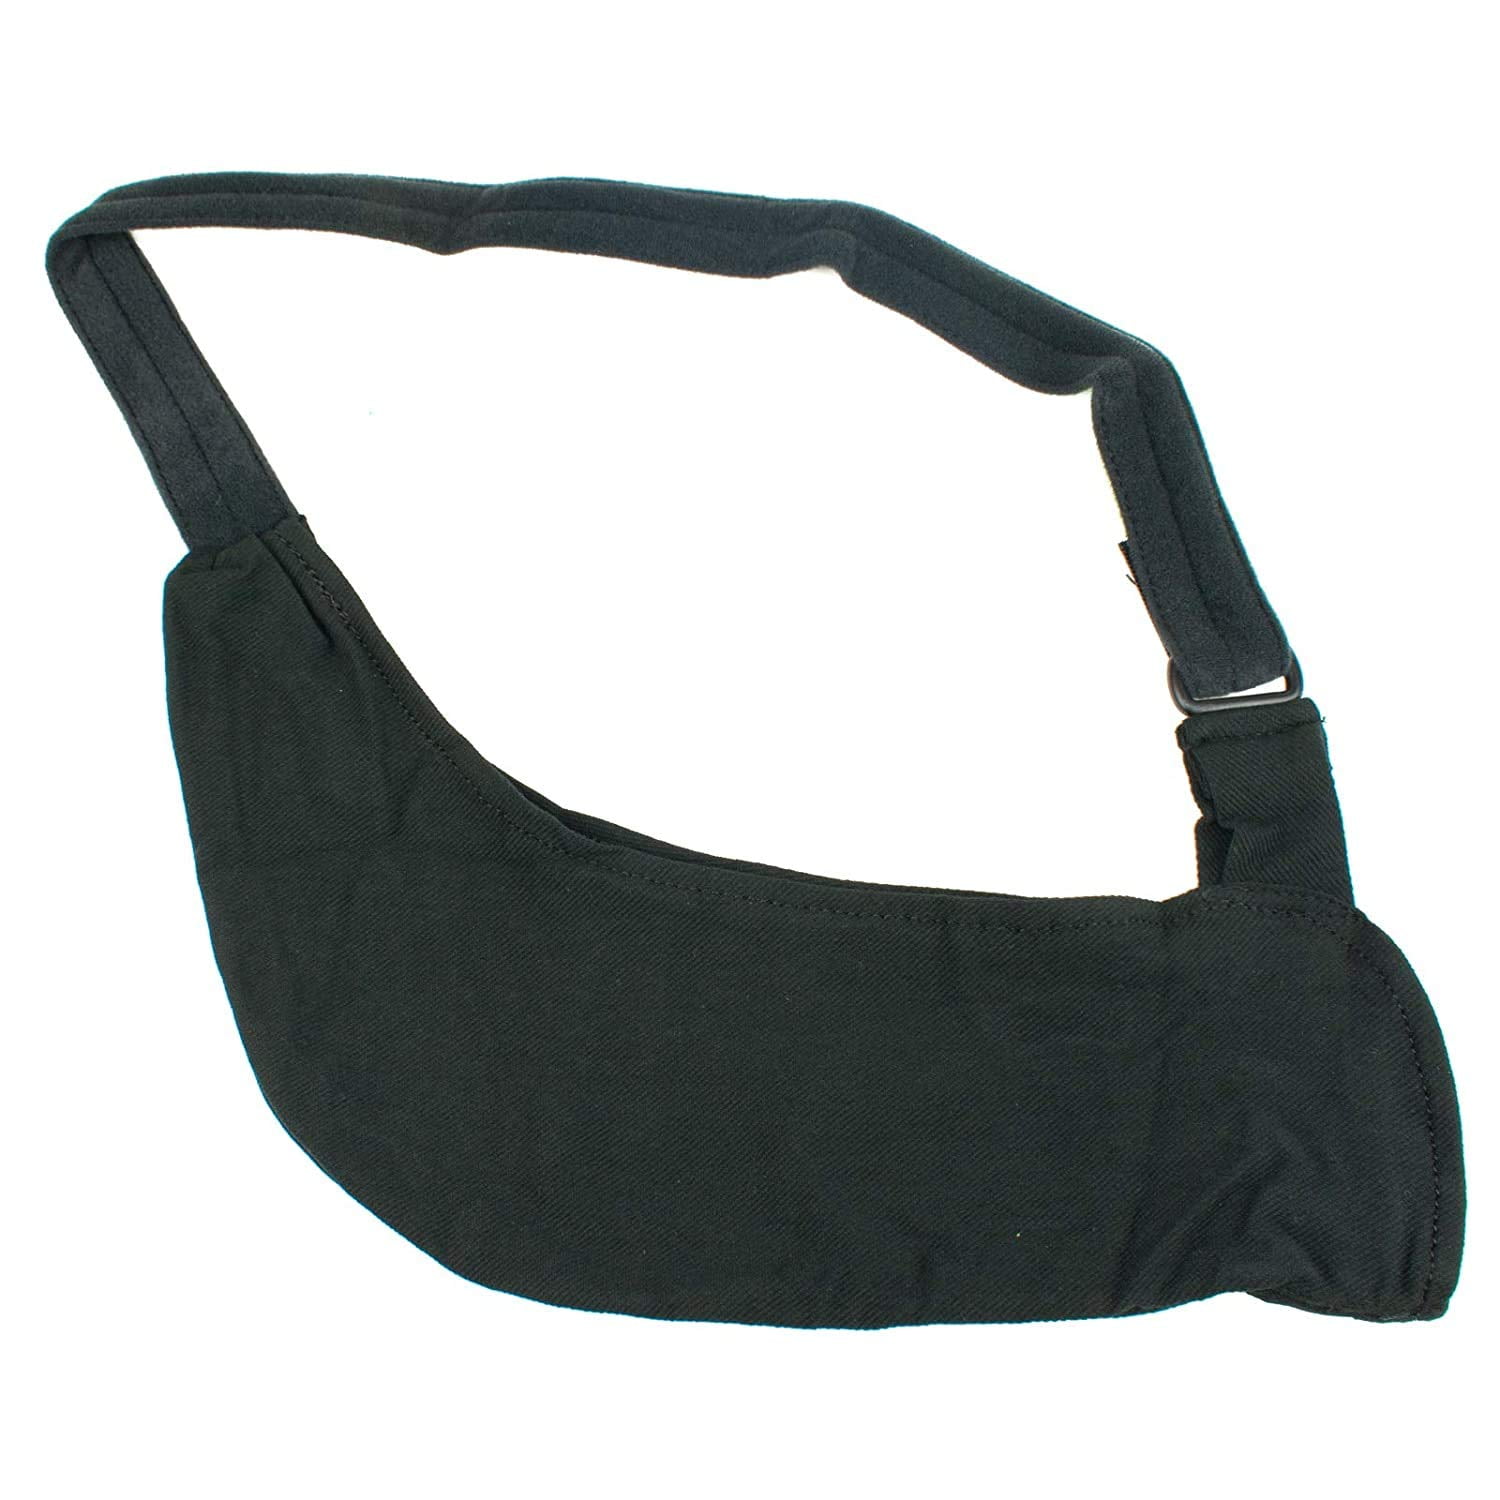 Joslin Sling Swathe - Arm Support Sling and Rotator Cuff or Shoulder ...